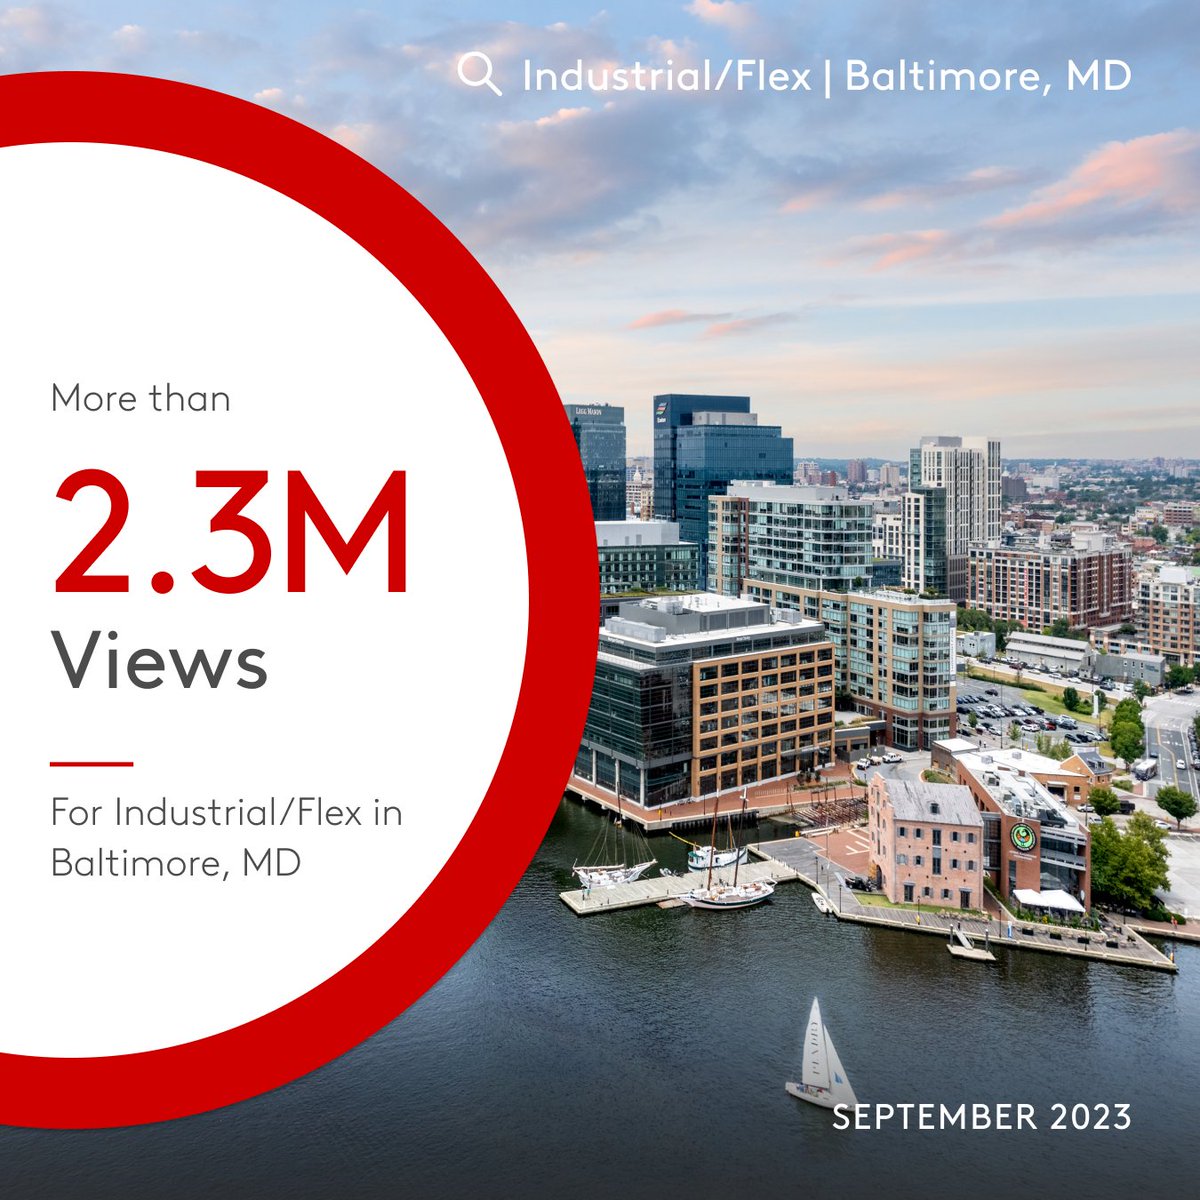 Baltimore's industrial market is on the rise! 🦀 Last month, there were more than 2.3 million views for #industrial/flex property in “Charm City” 🏭 See how you can maximize your listing’s visibility on LoopNet1 🔗 bit.ly/3UV4asN